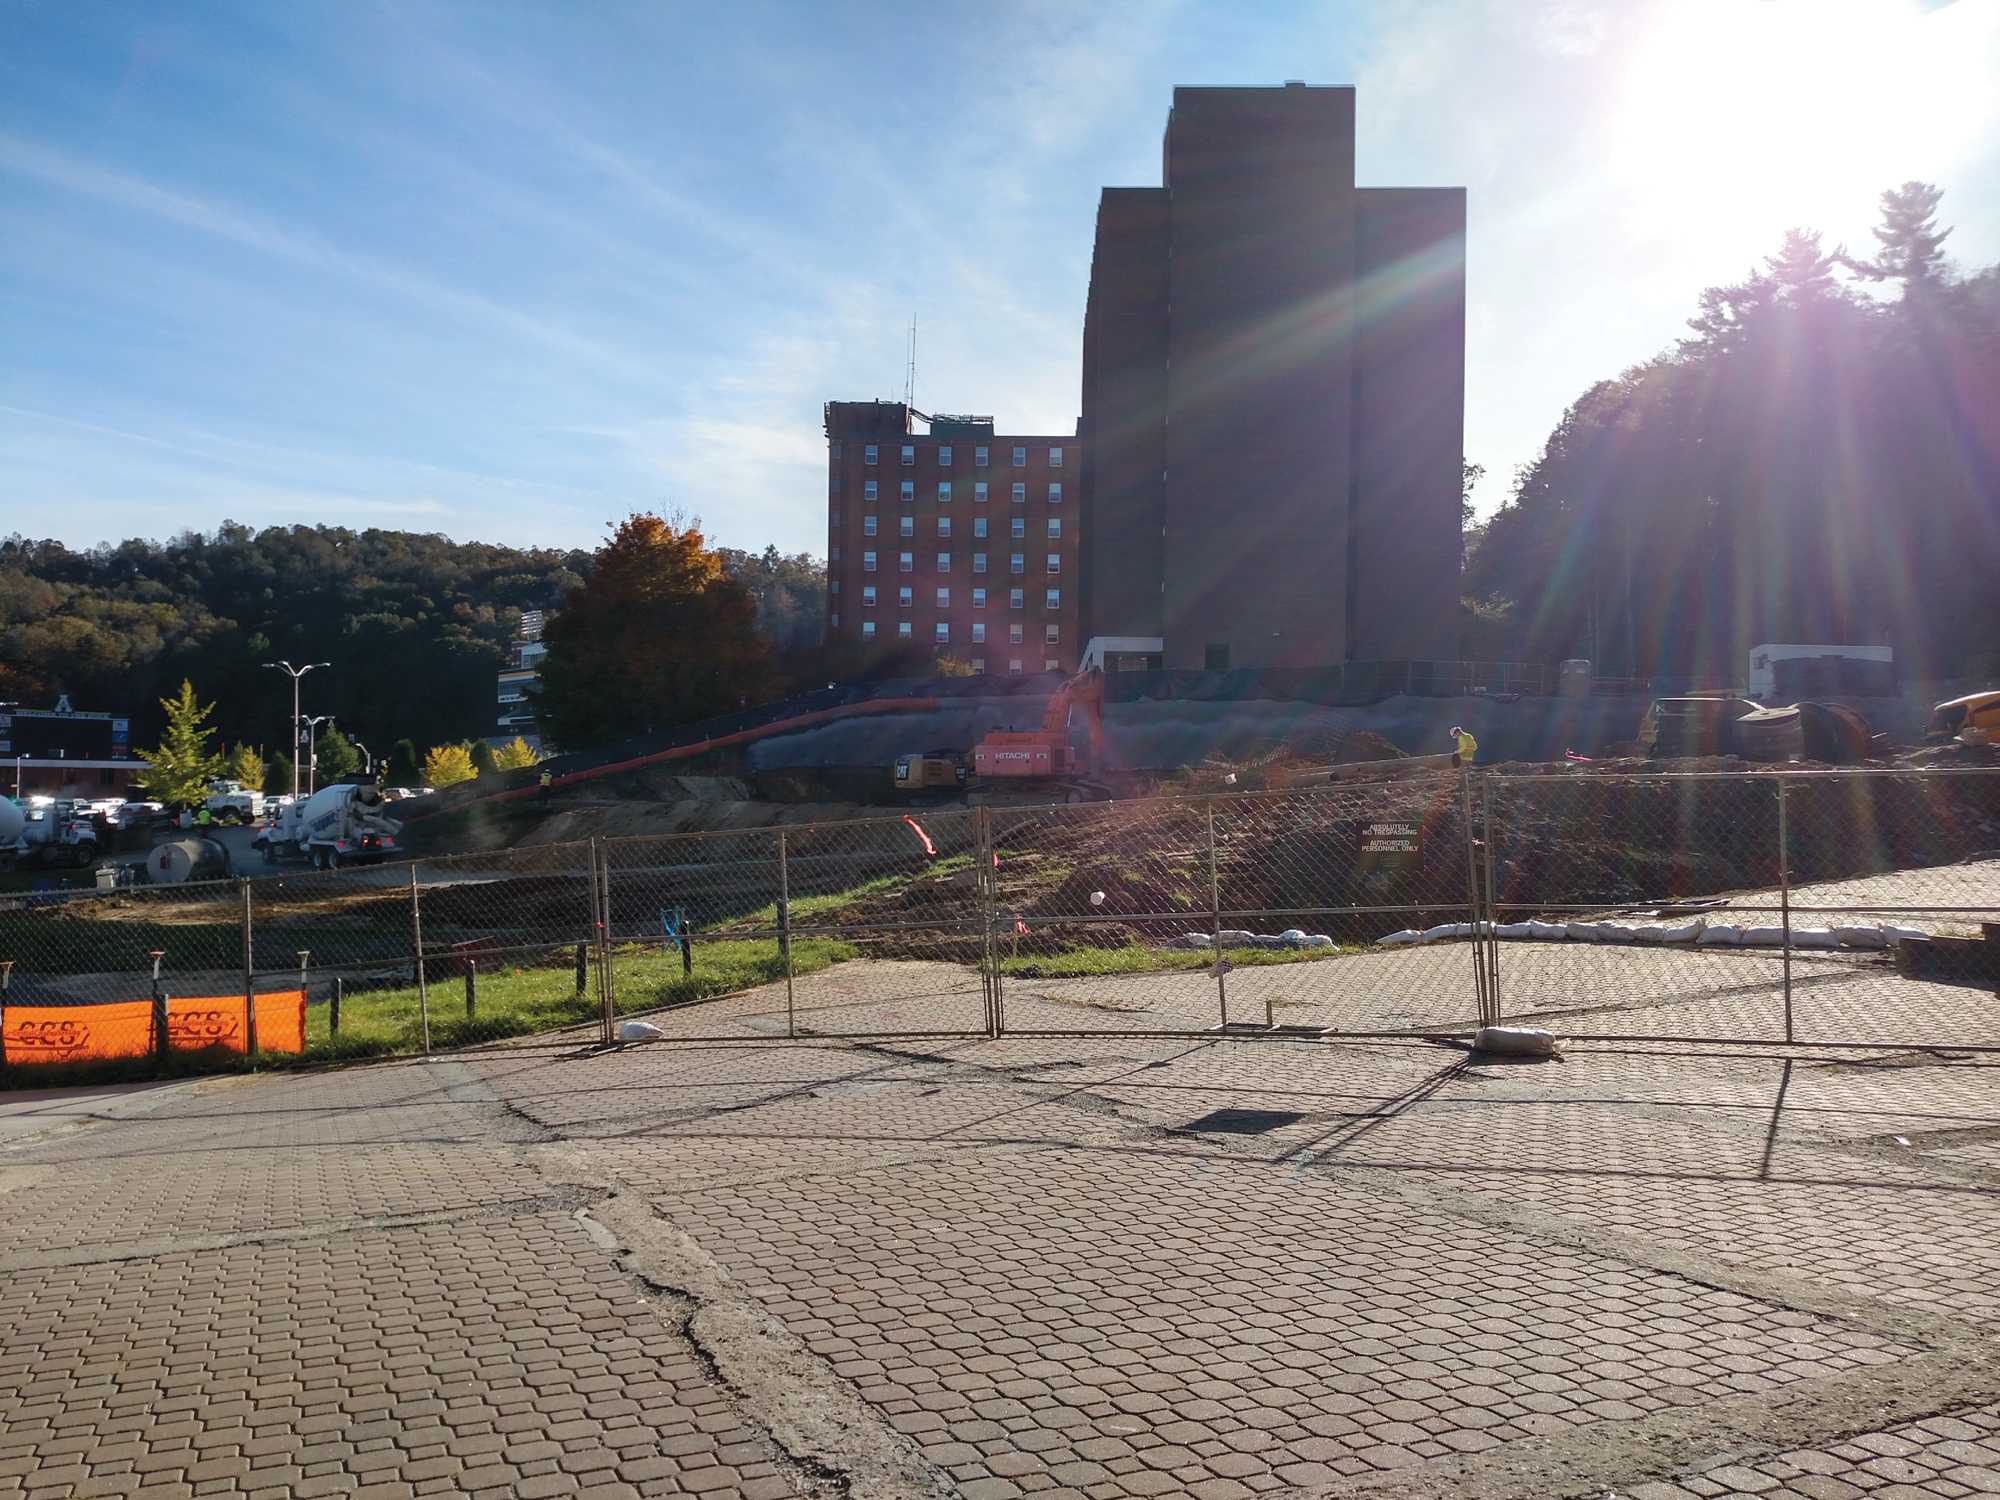 Construction near Eggers Hall on west campus. This construction is one of many building projects happening in Boone.